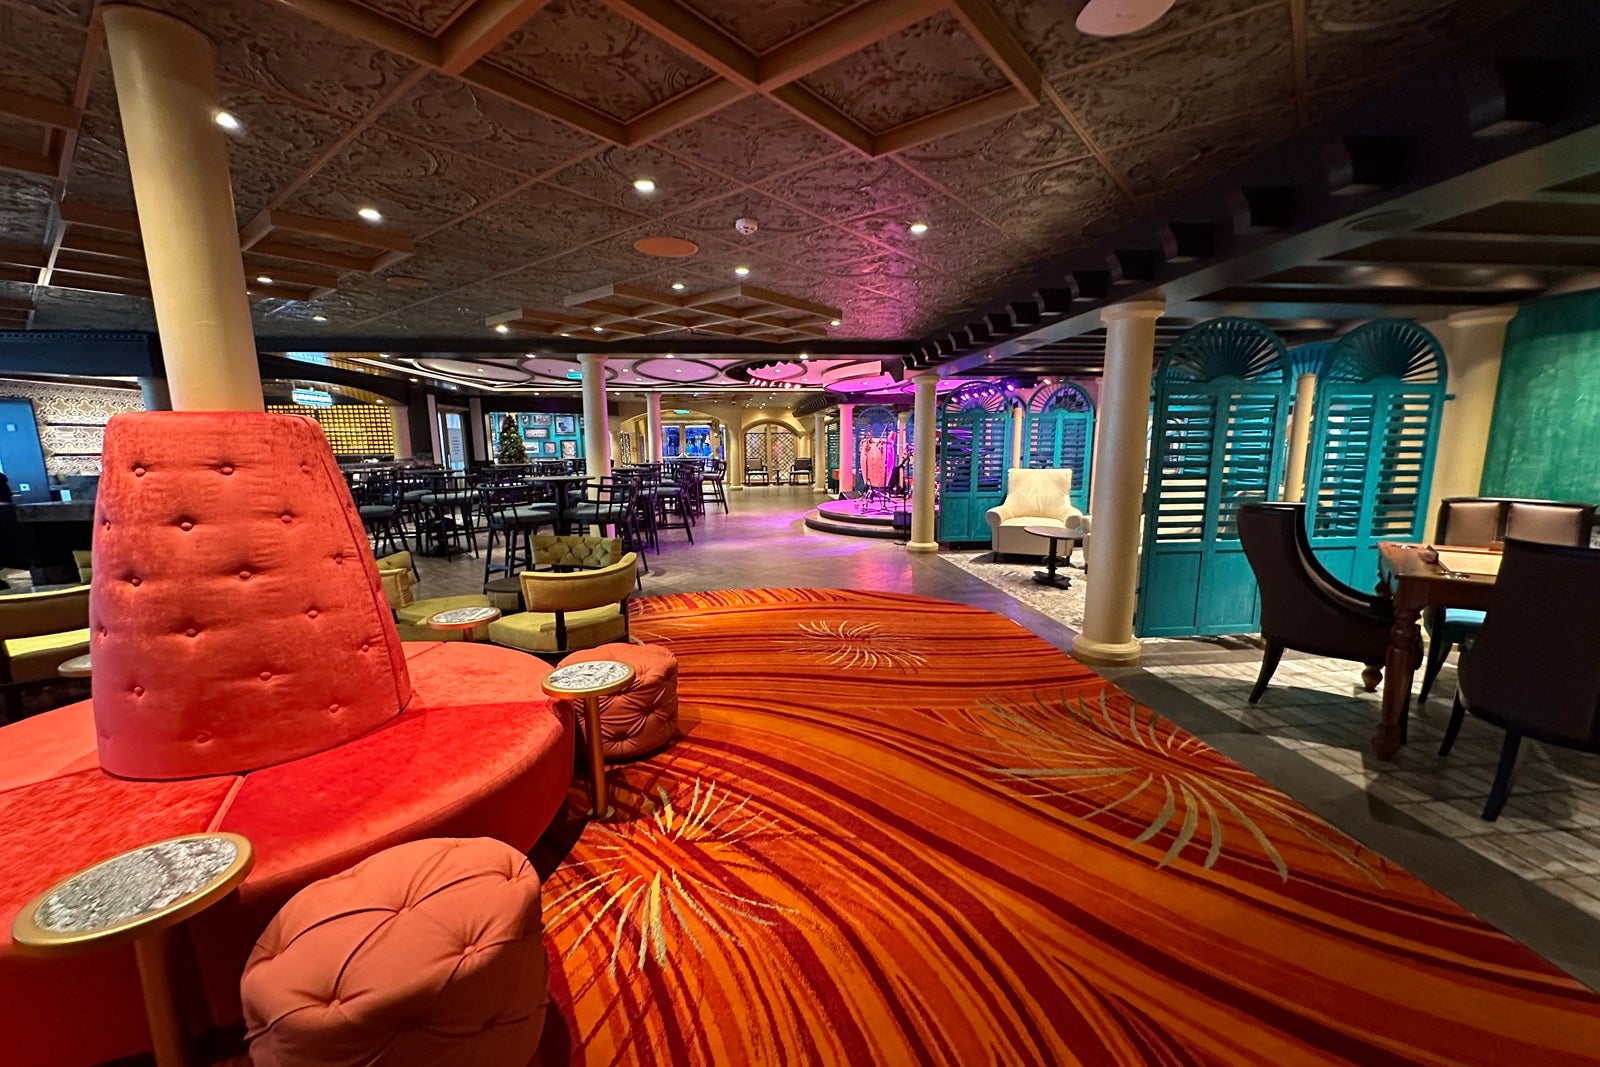 A lounge with bright orange carpet, an orange sofa and several seating alcoves in bright colors like magenta and turquoise